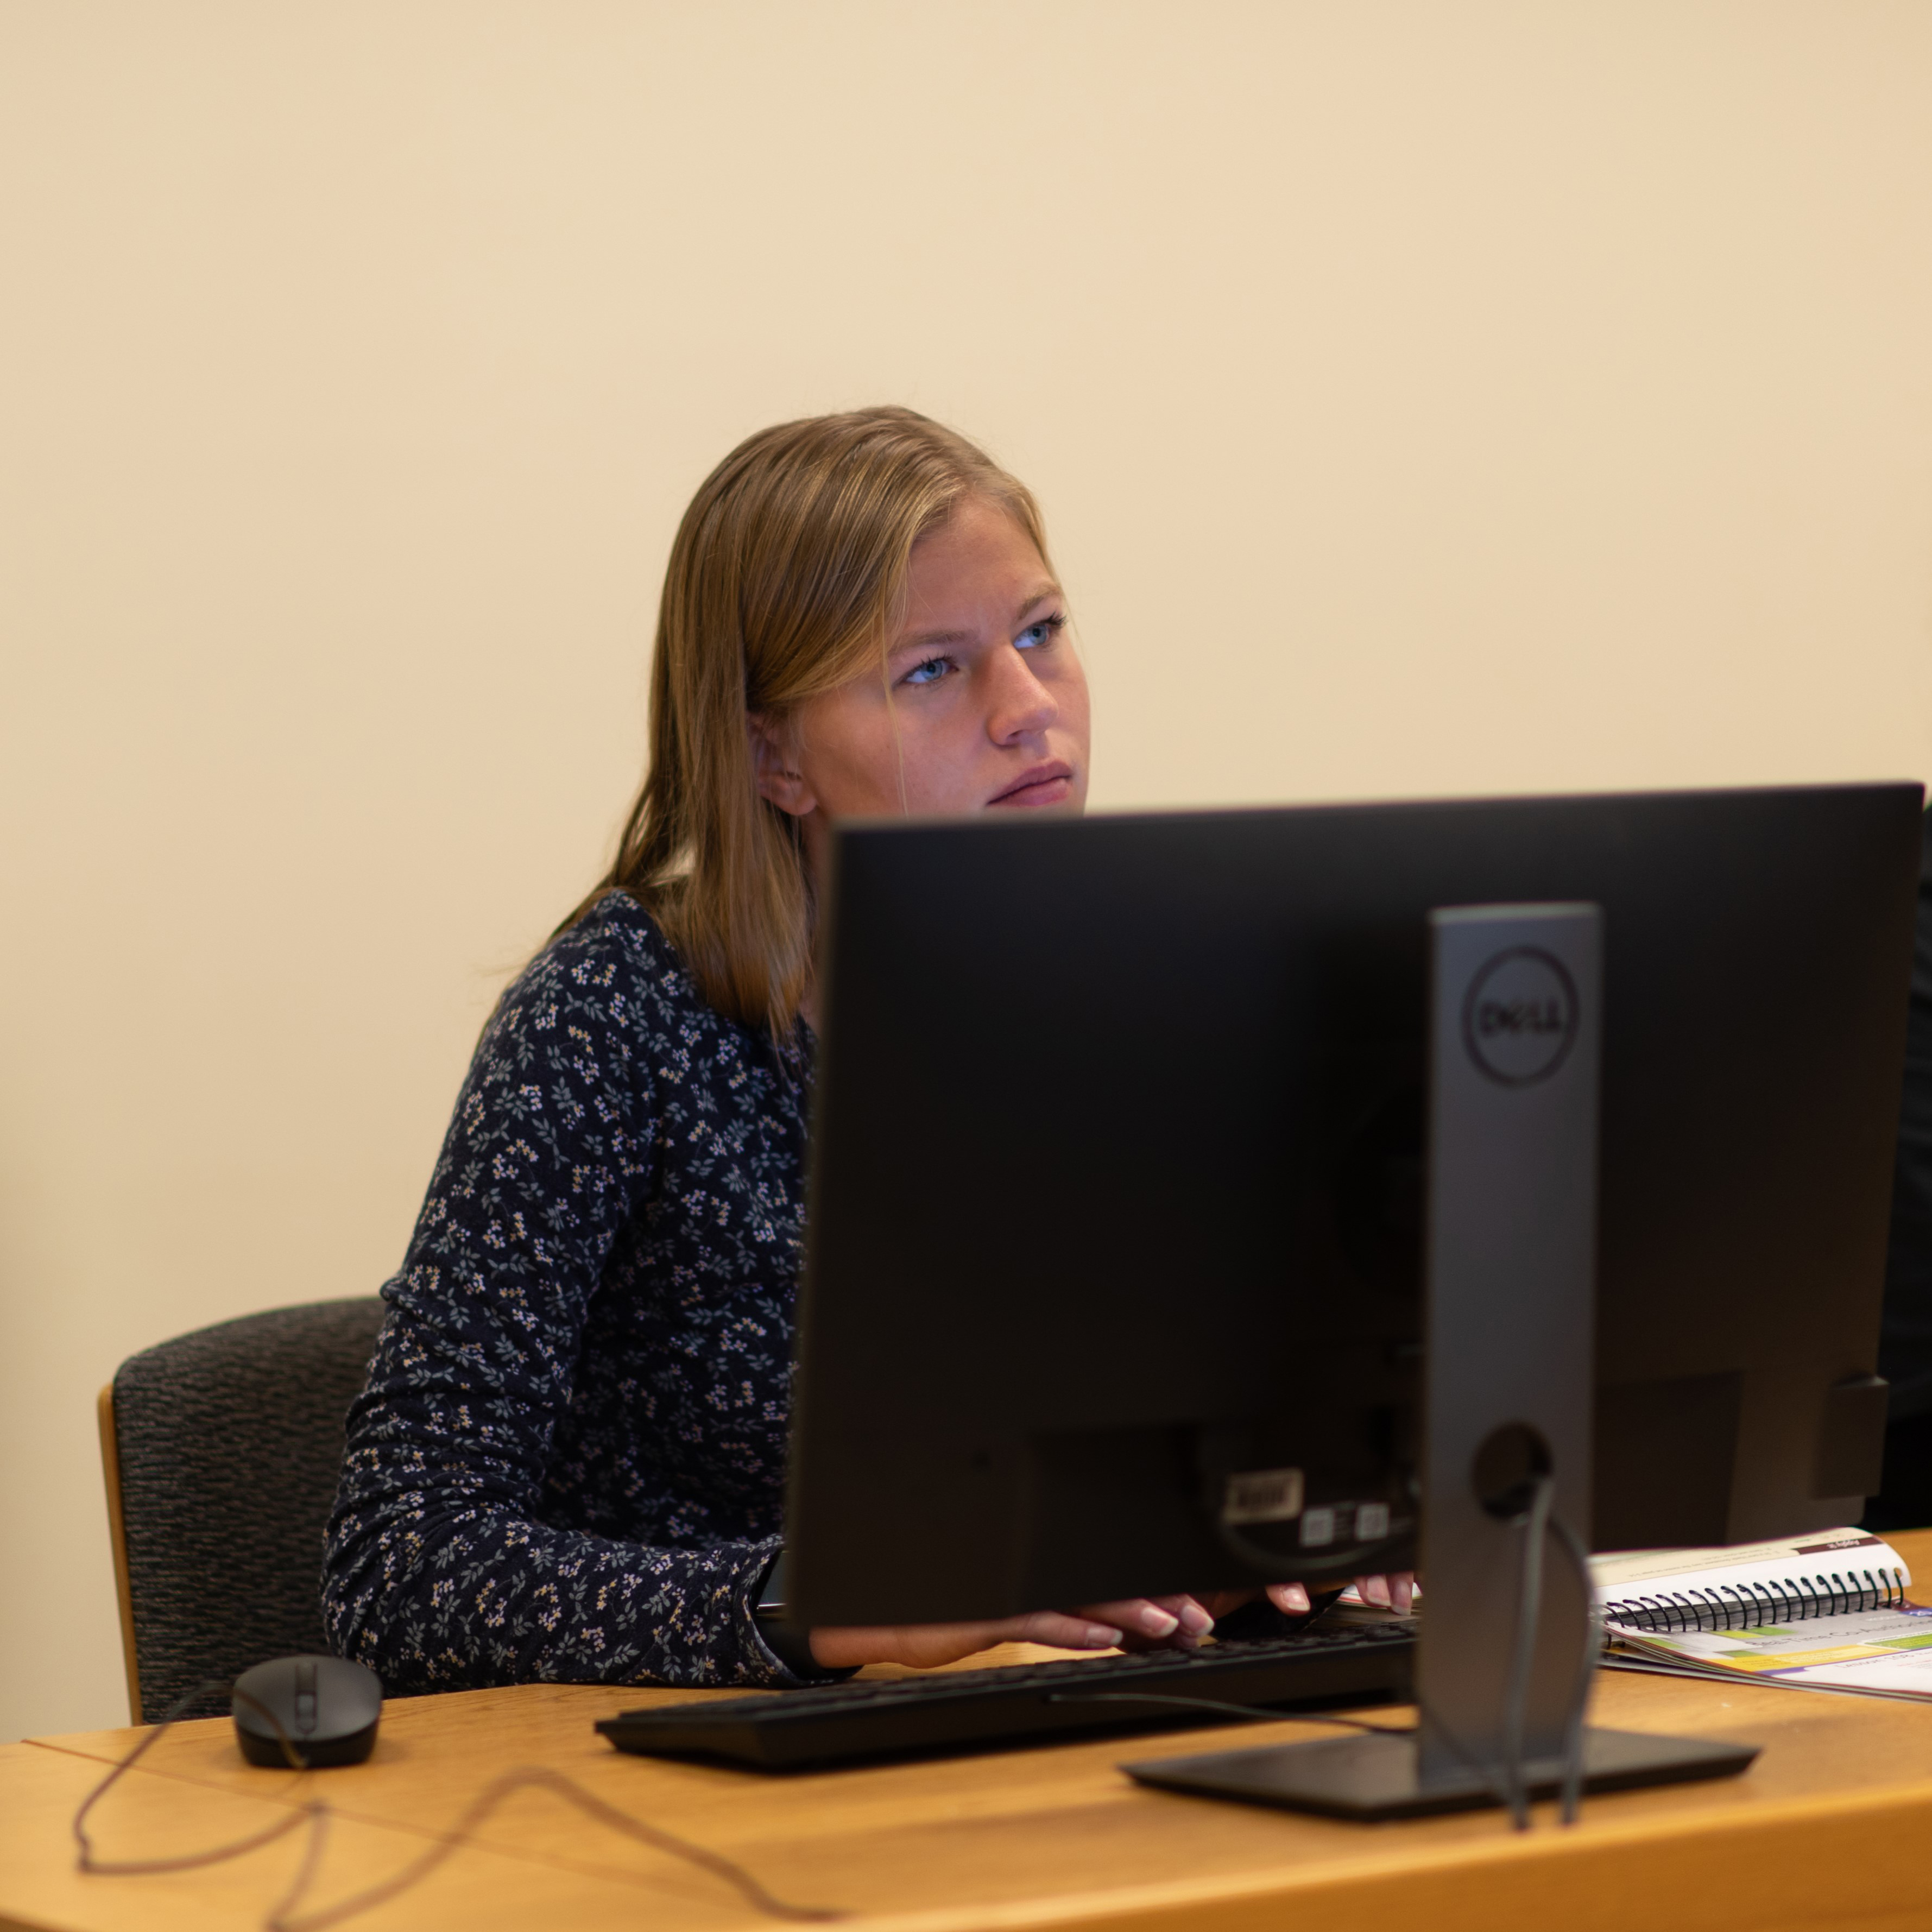 Female student sitting at computer